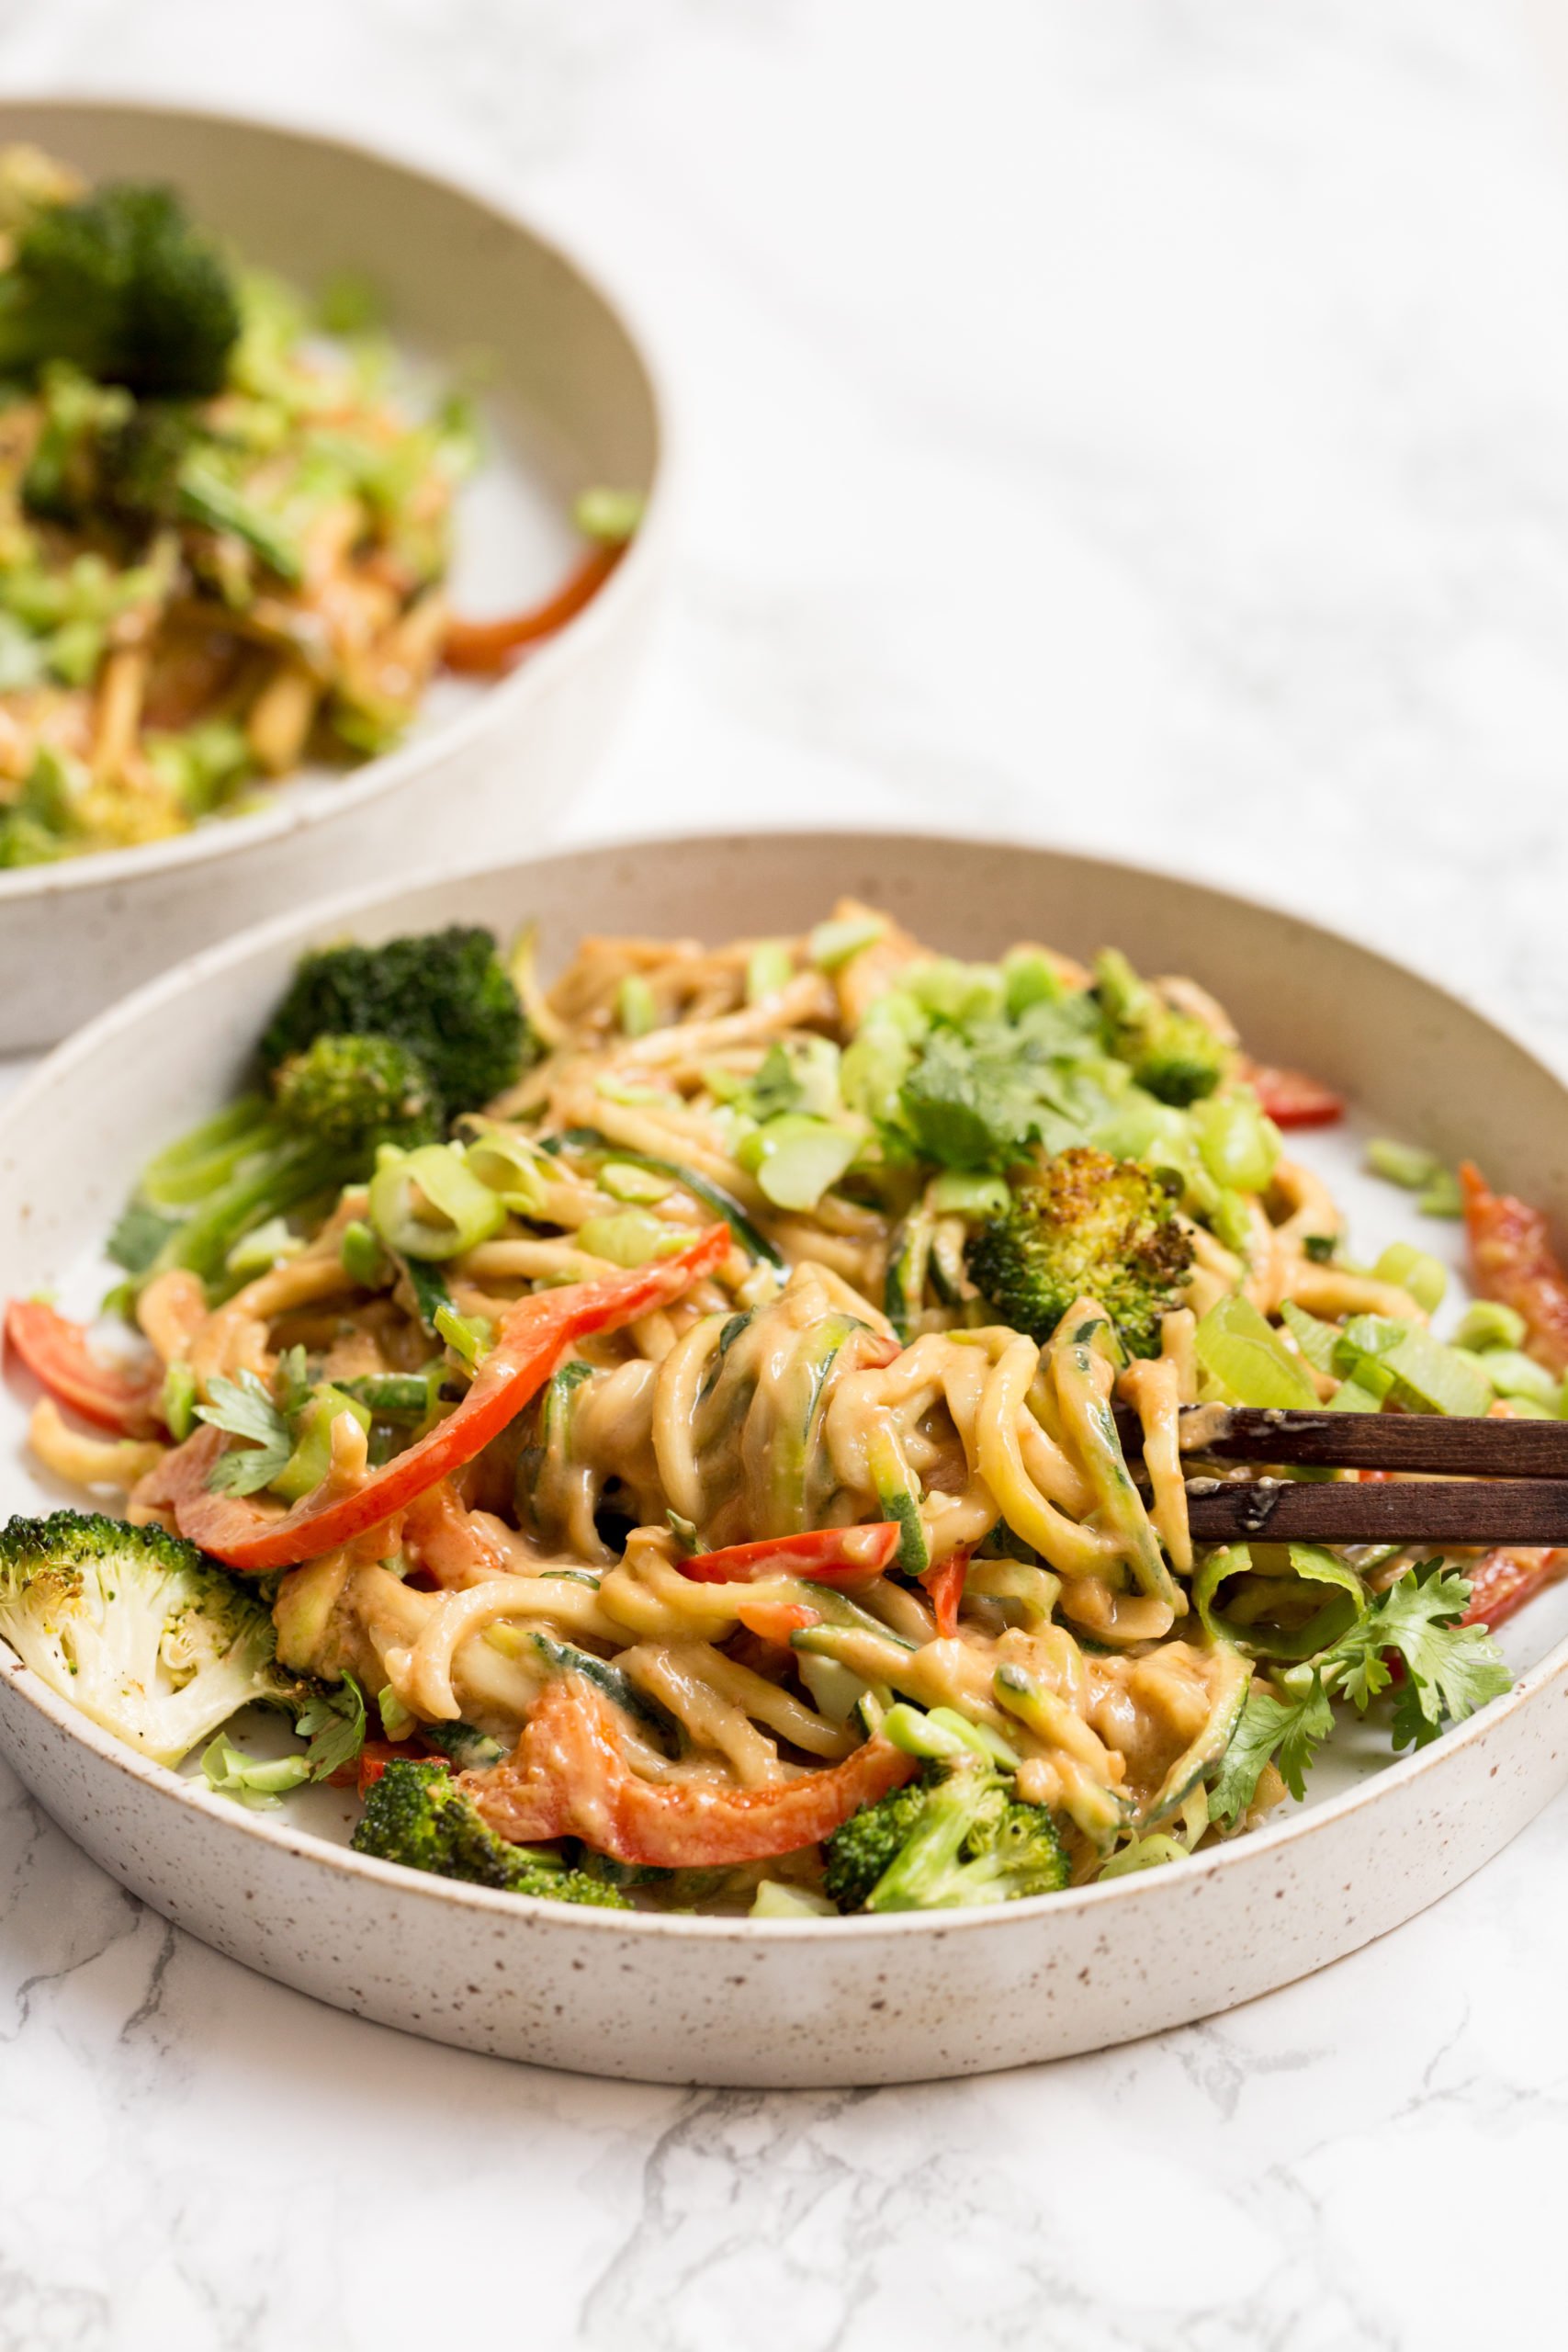 Peanut Zoodles with Grilled Broccoli